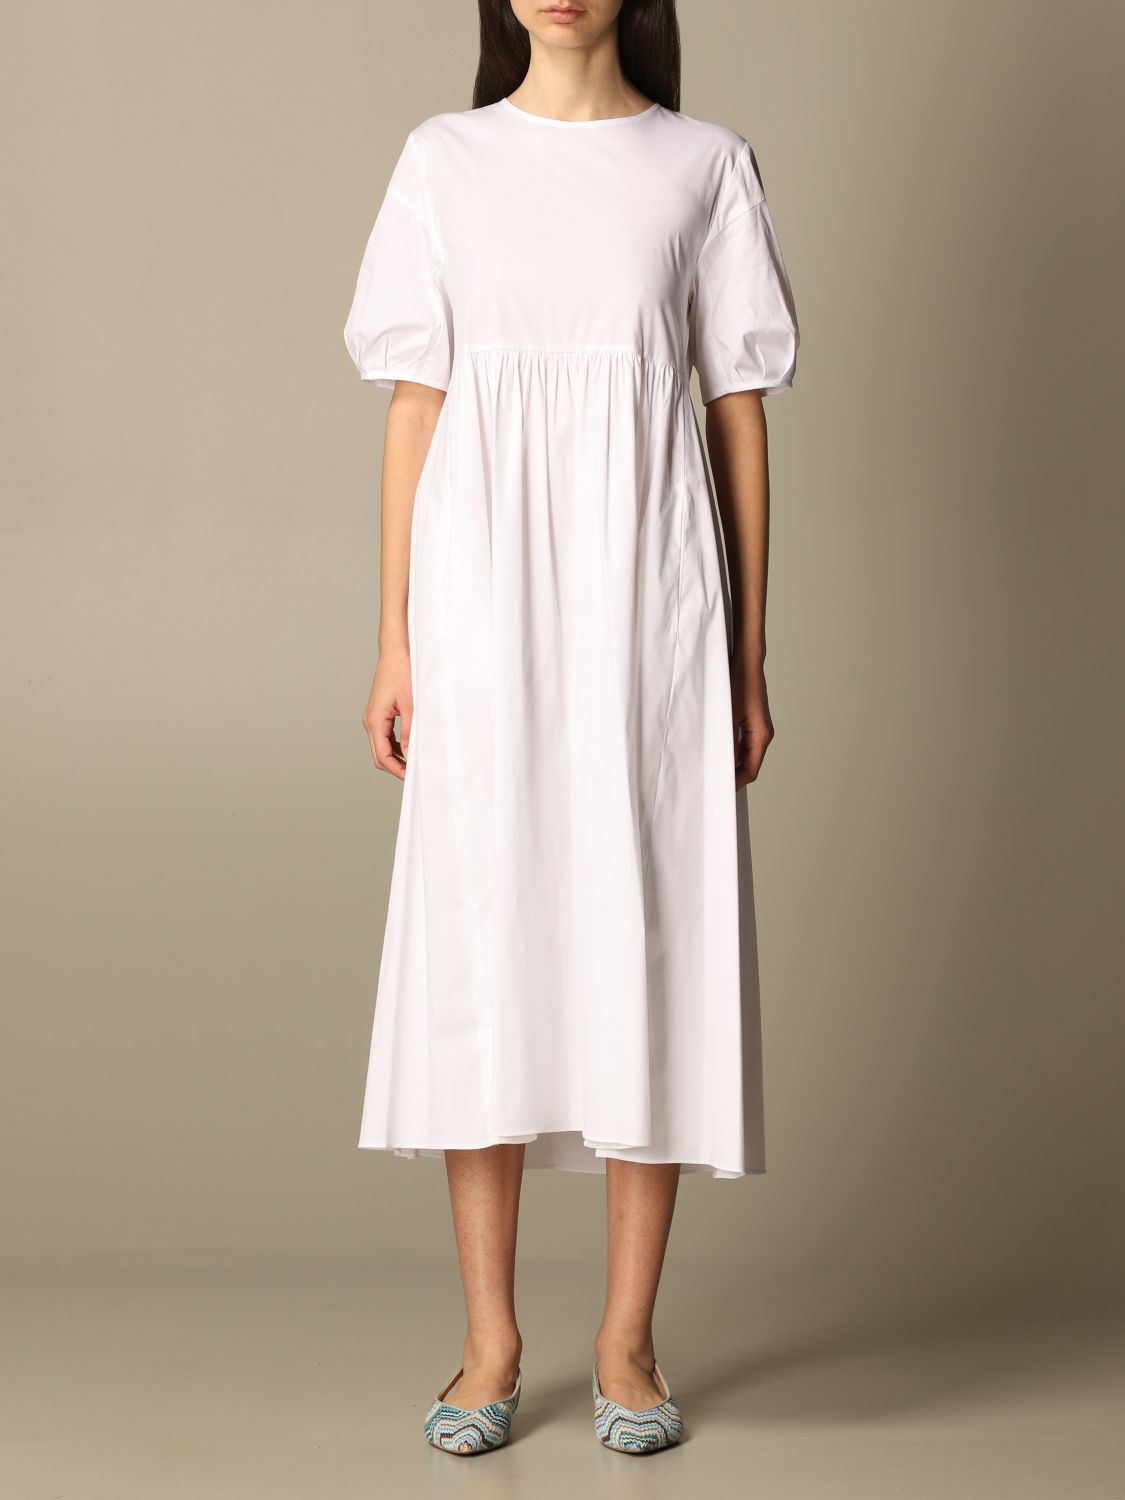 S Max Mara Outlet: dress in cotton blend - White | S Max Mara dresses